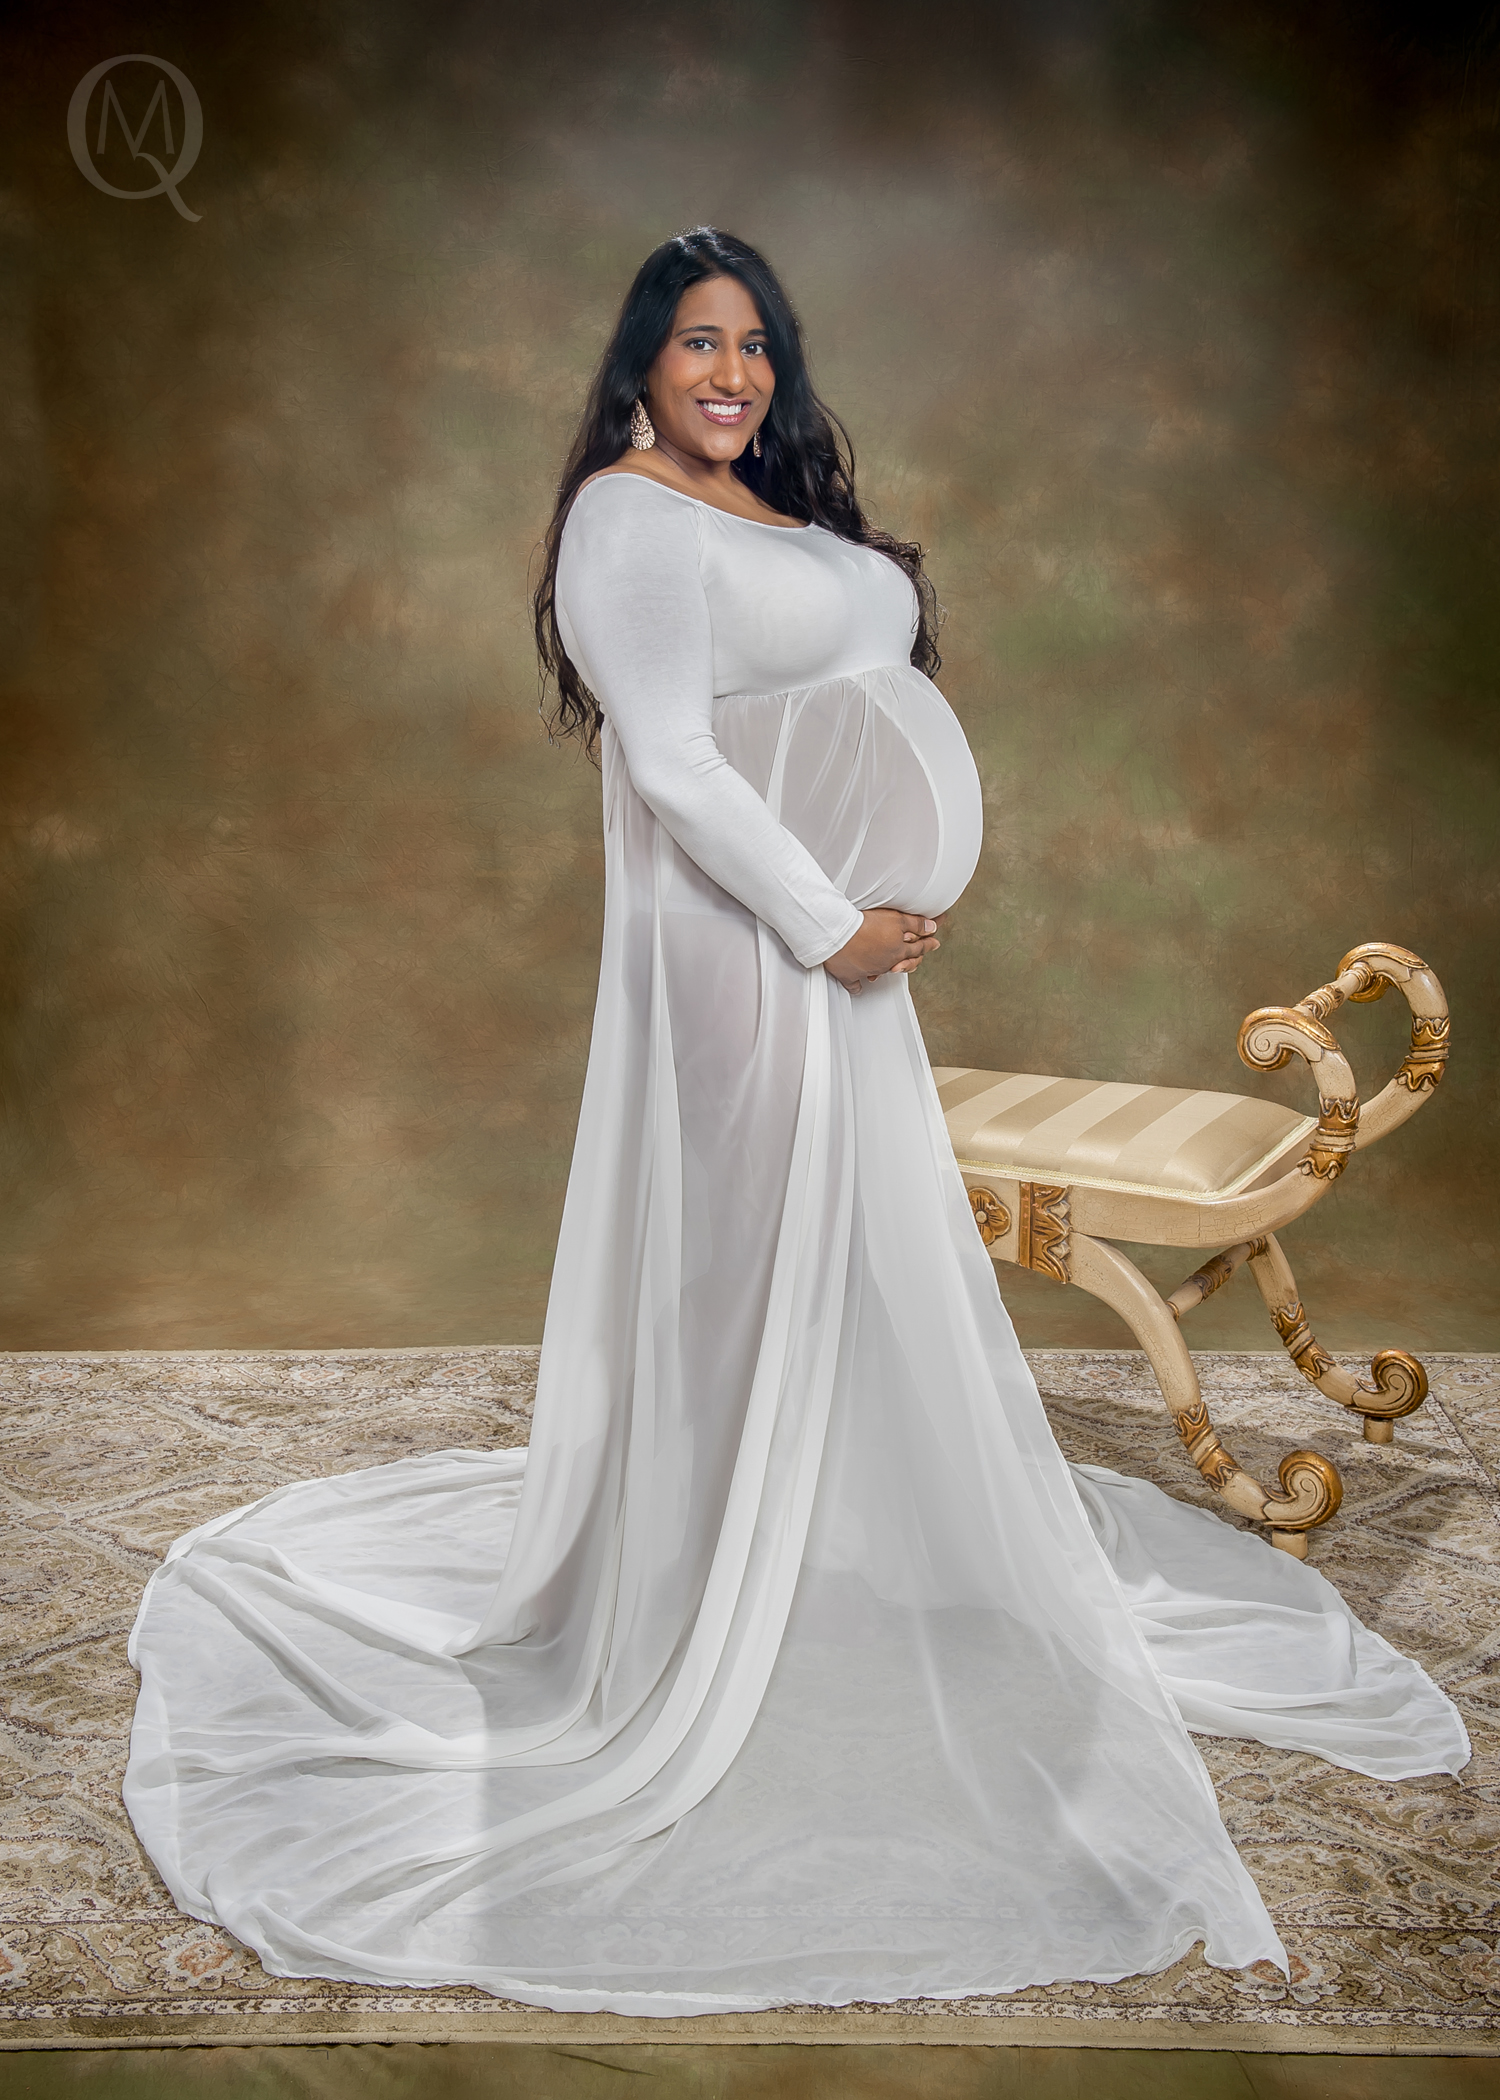 A Maternity Photo Session in a Studio located in South Jersey.